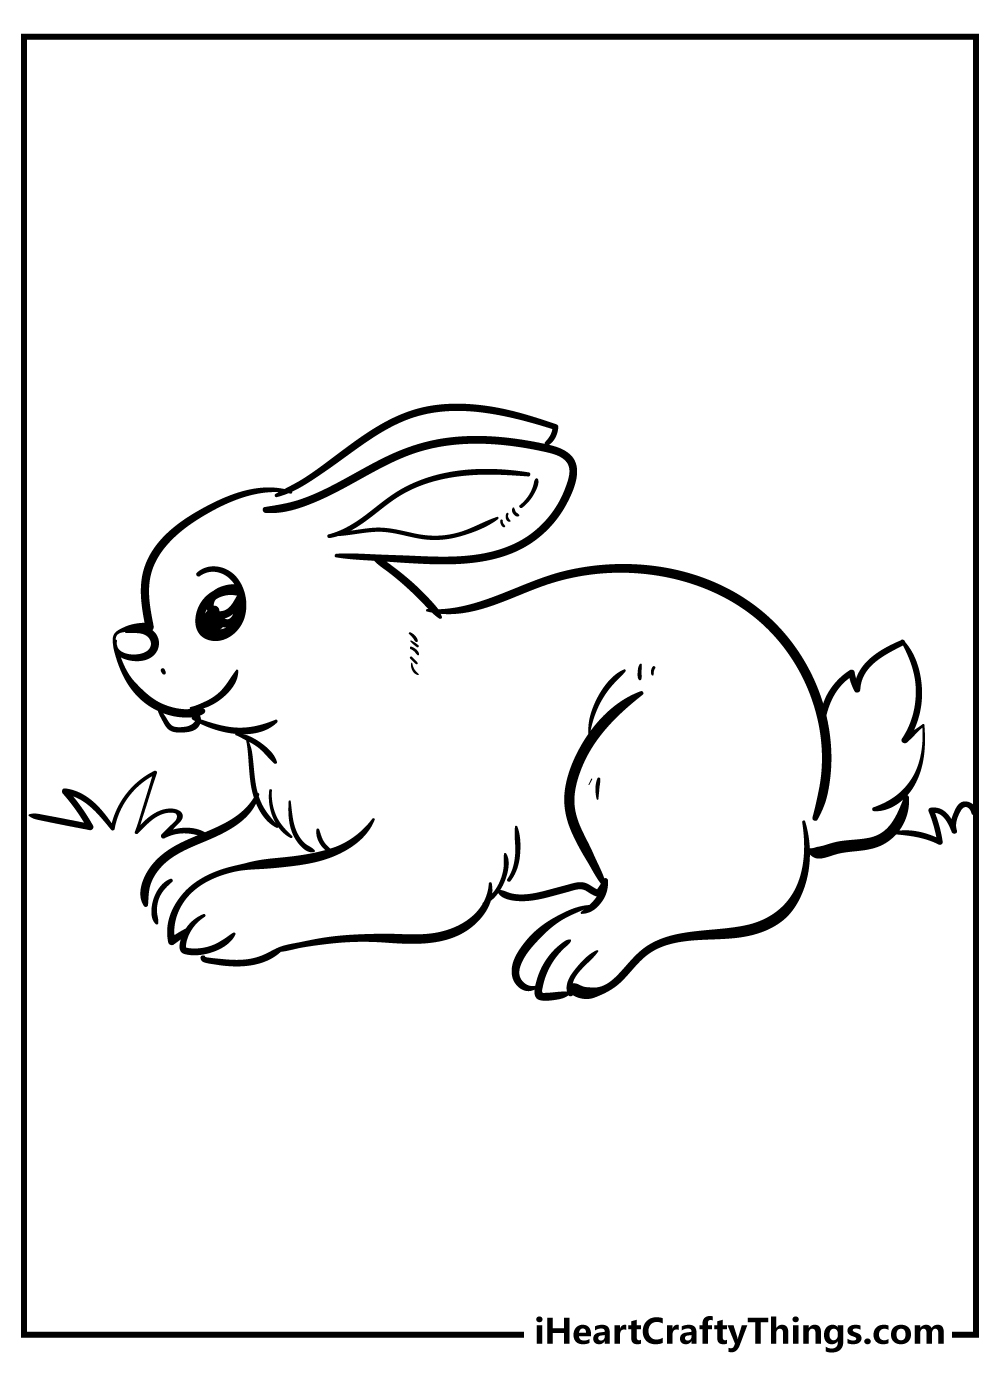 Peter Rabbit coloring pages free printable